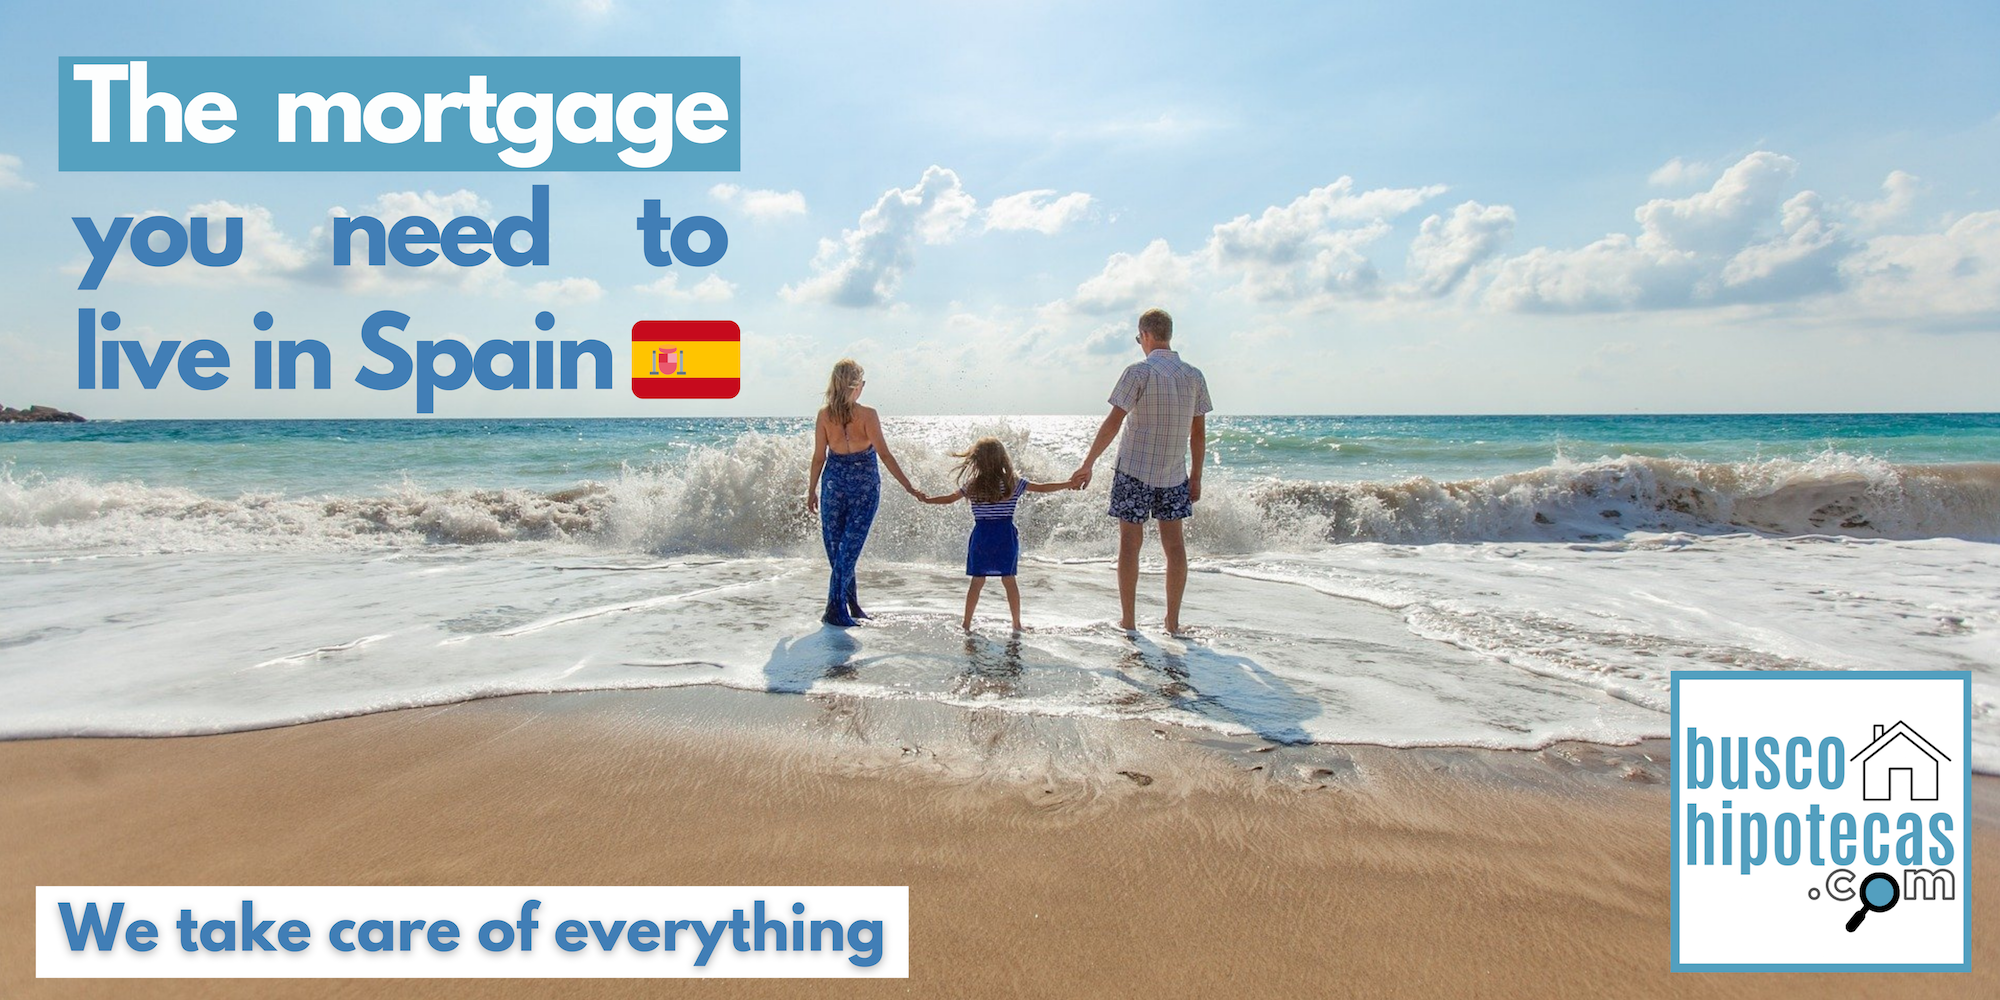 The mortgage you need to live in Spain